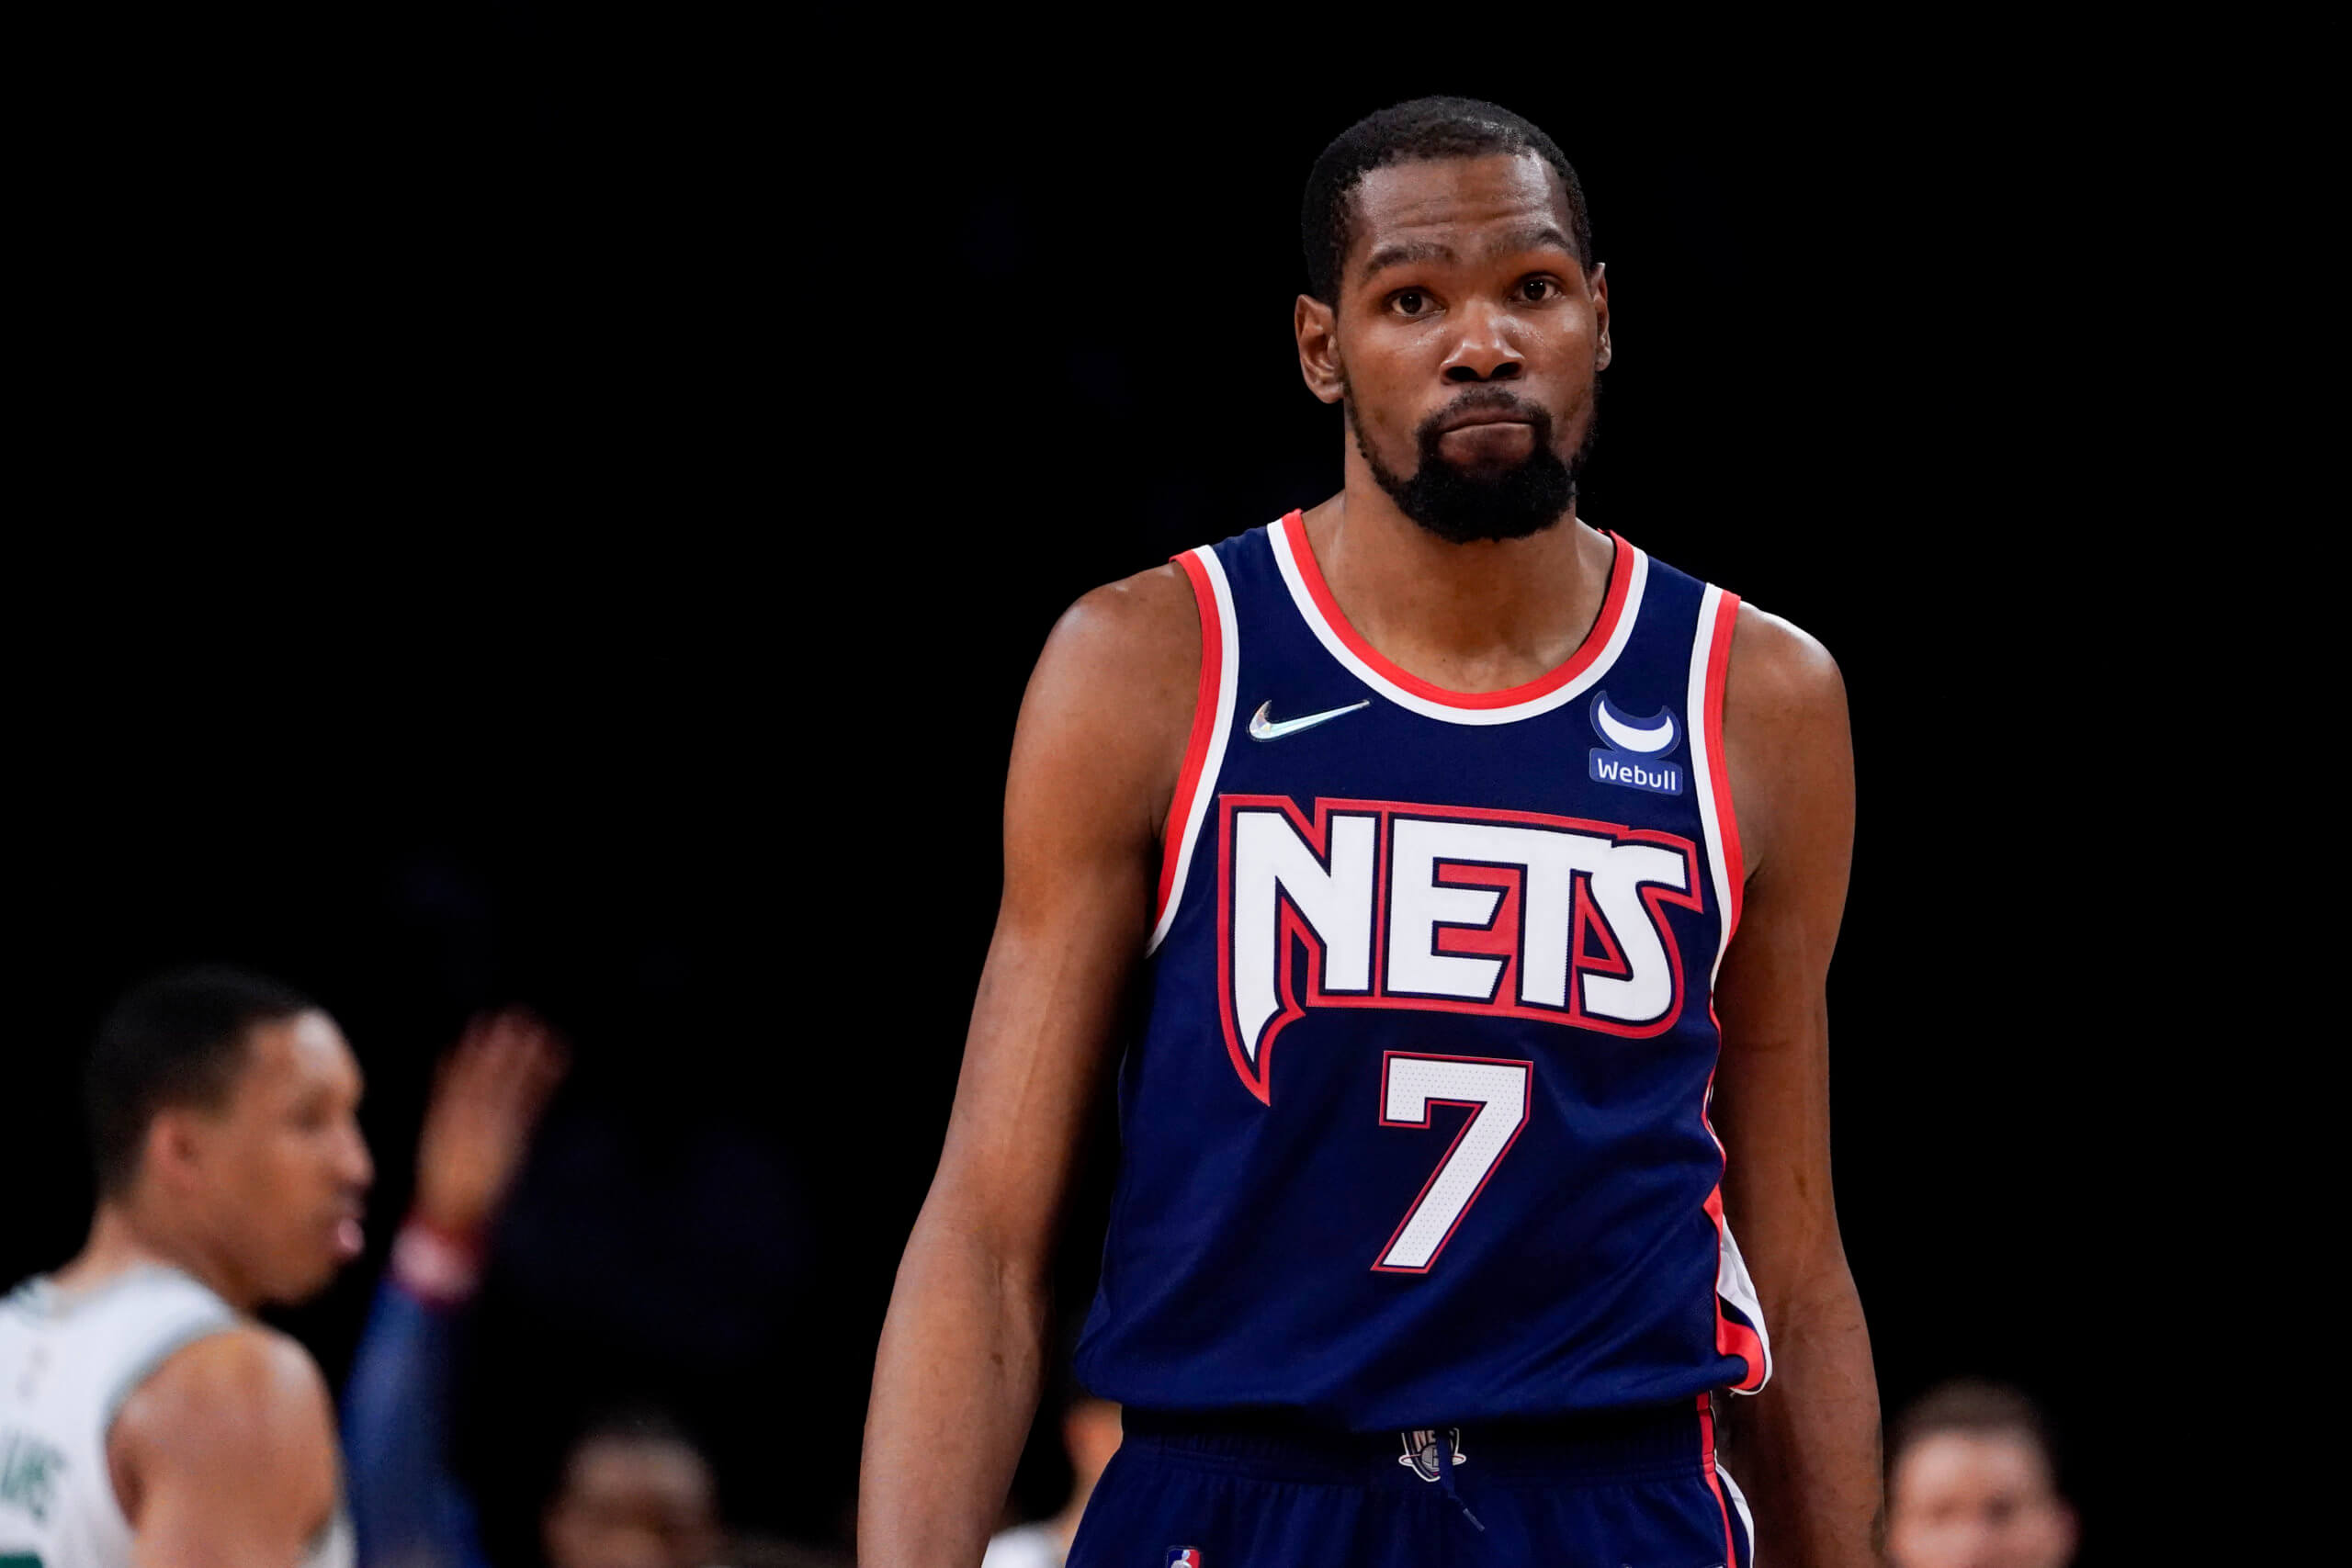 As Brooklyn's best all-around player, it's time for Kevin Durant